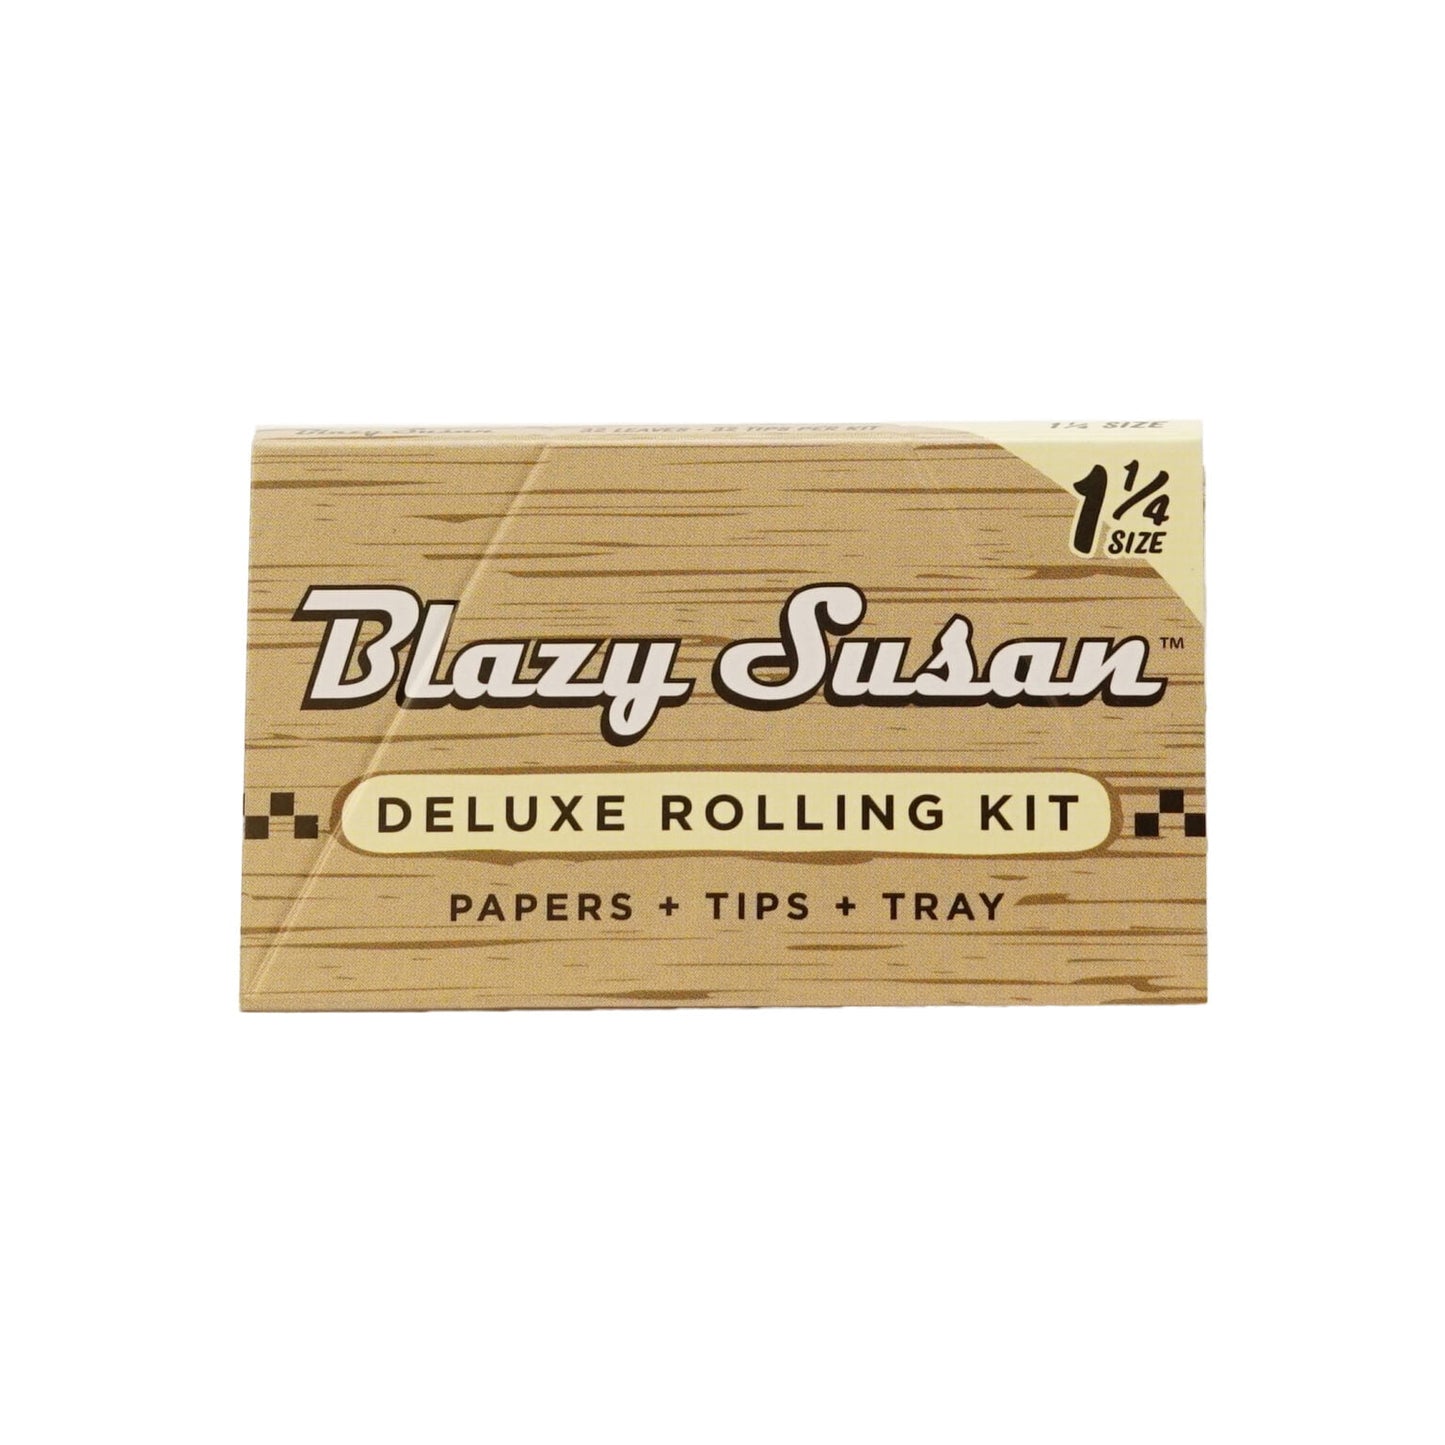 Blazy Susan 1¼ Deluxe Rolling Kit - Unbleached